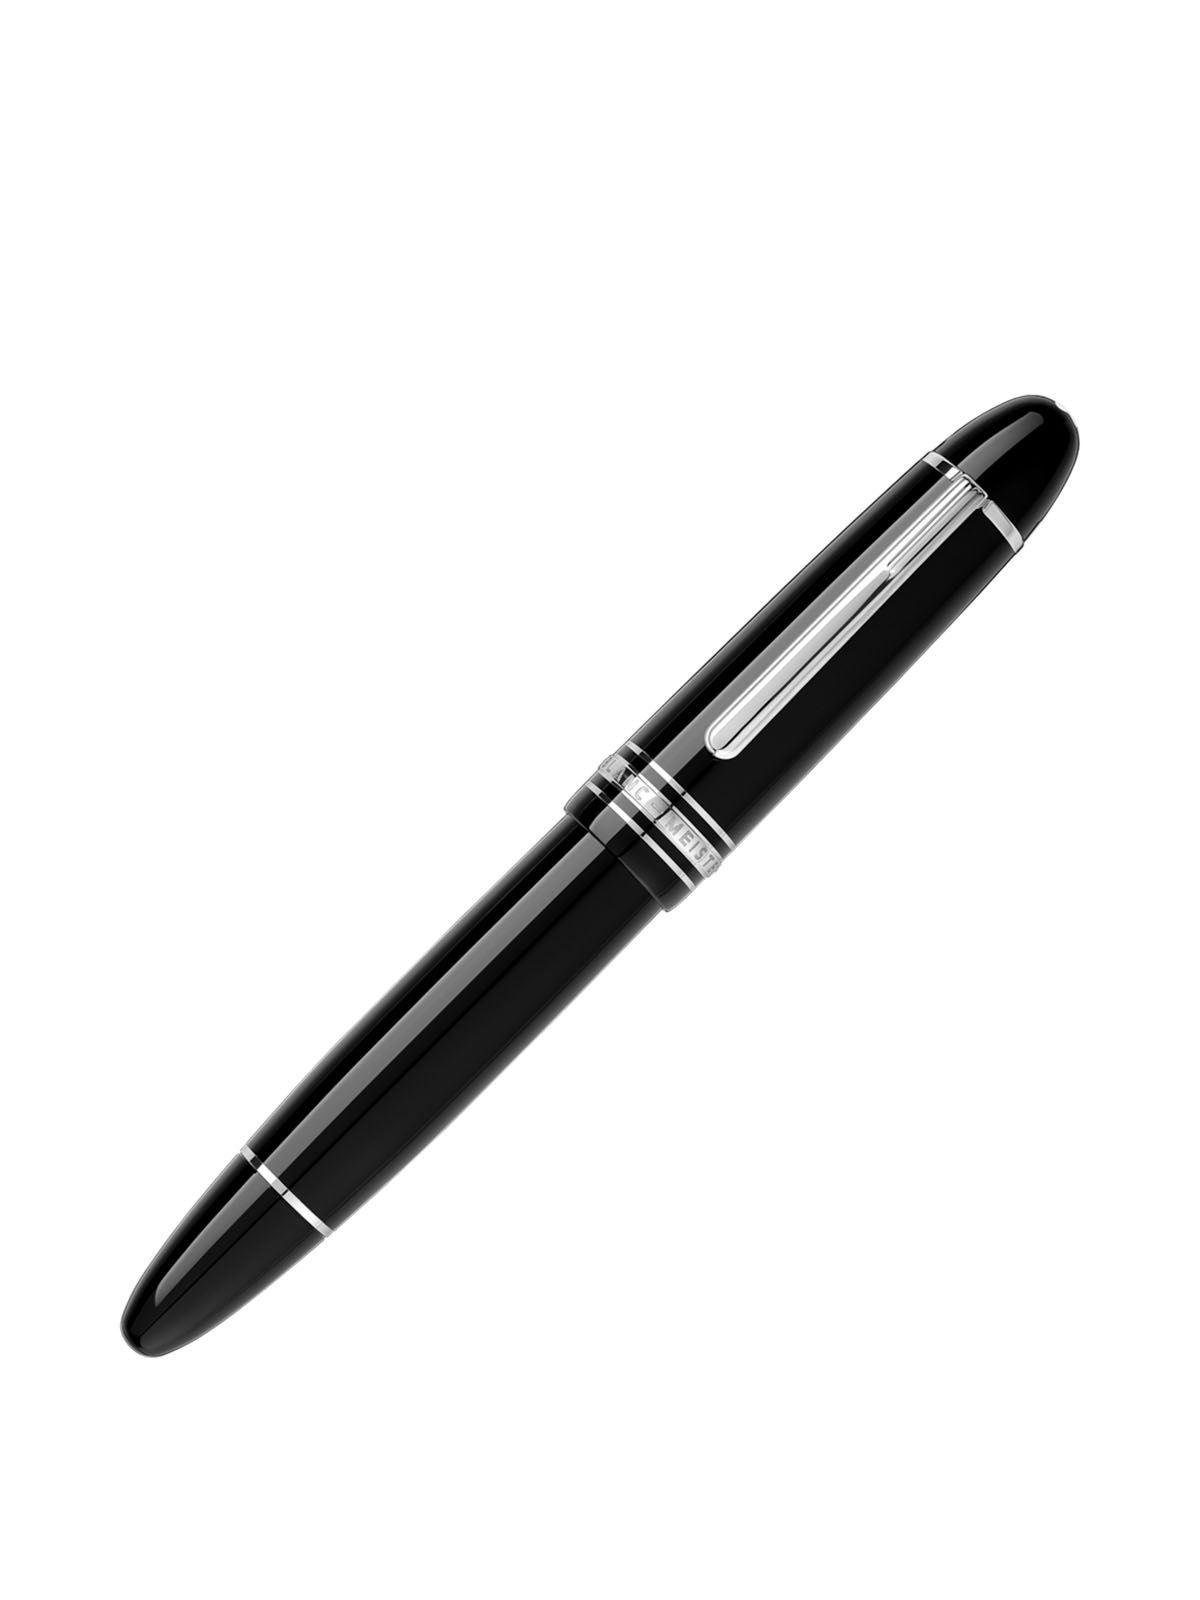 Montblanc Meisterstuck Platinum-Coated 149 Fountain Pen MB114229